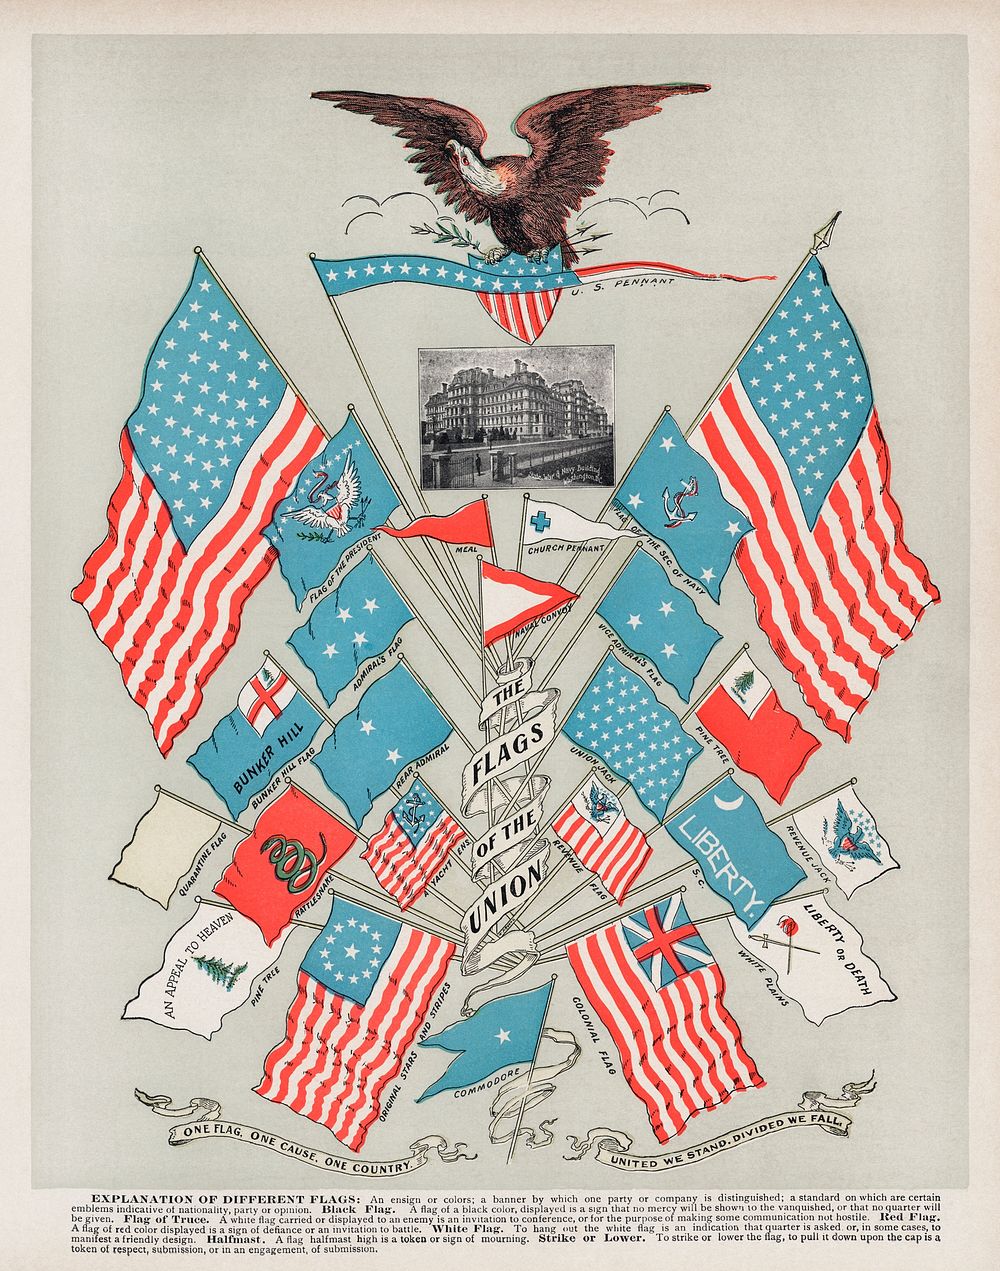 The Flags of the Union (1901), a vibrantly colored illustration of various USA flags and a bald eagle perched on top.…